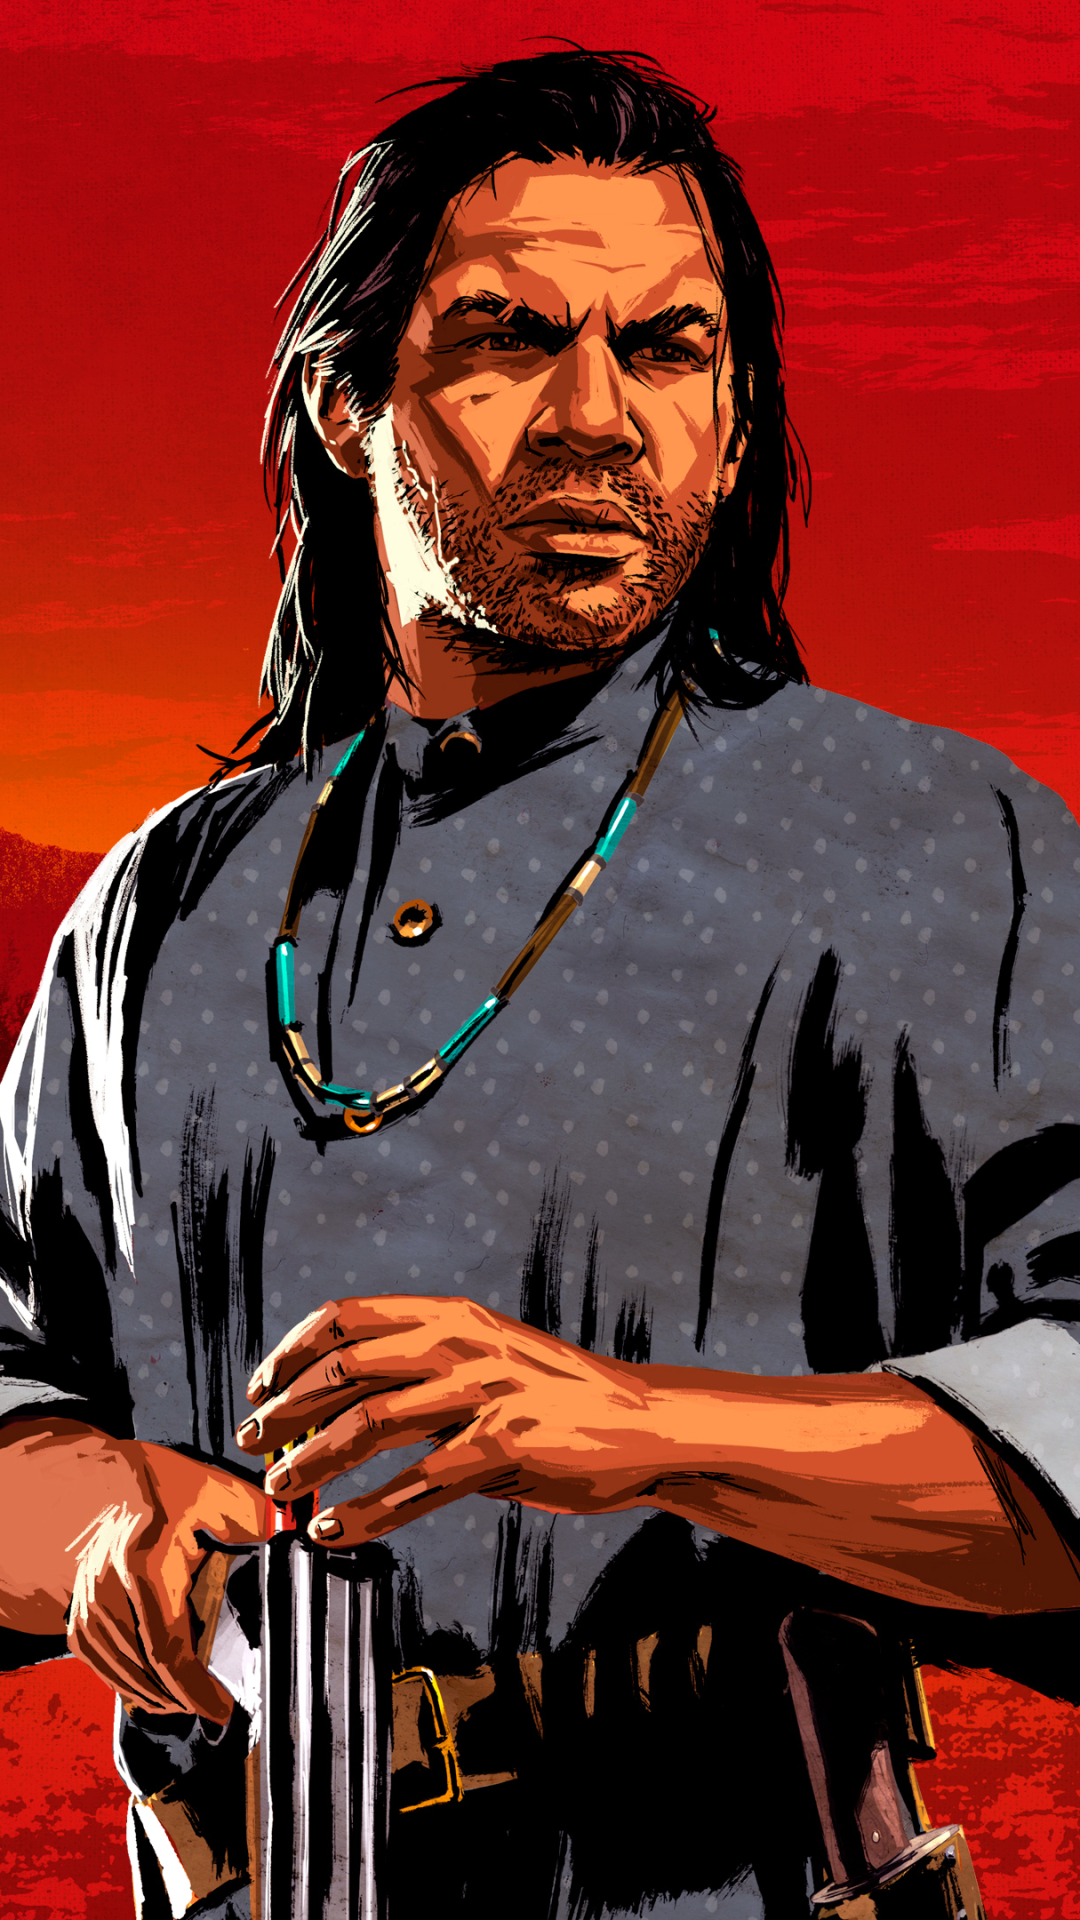 Red Dead Redemption 2 Phone Wallpaper